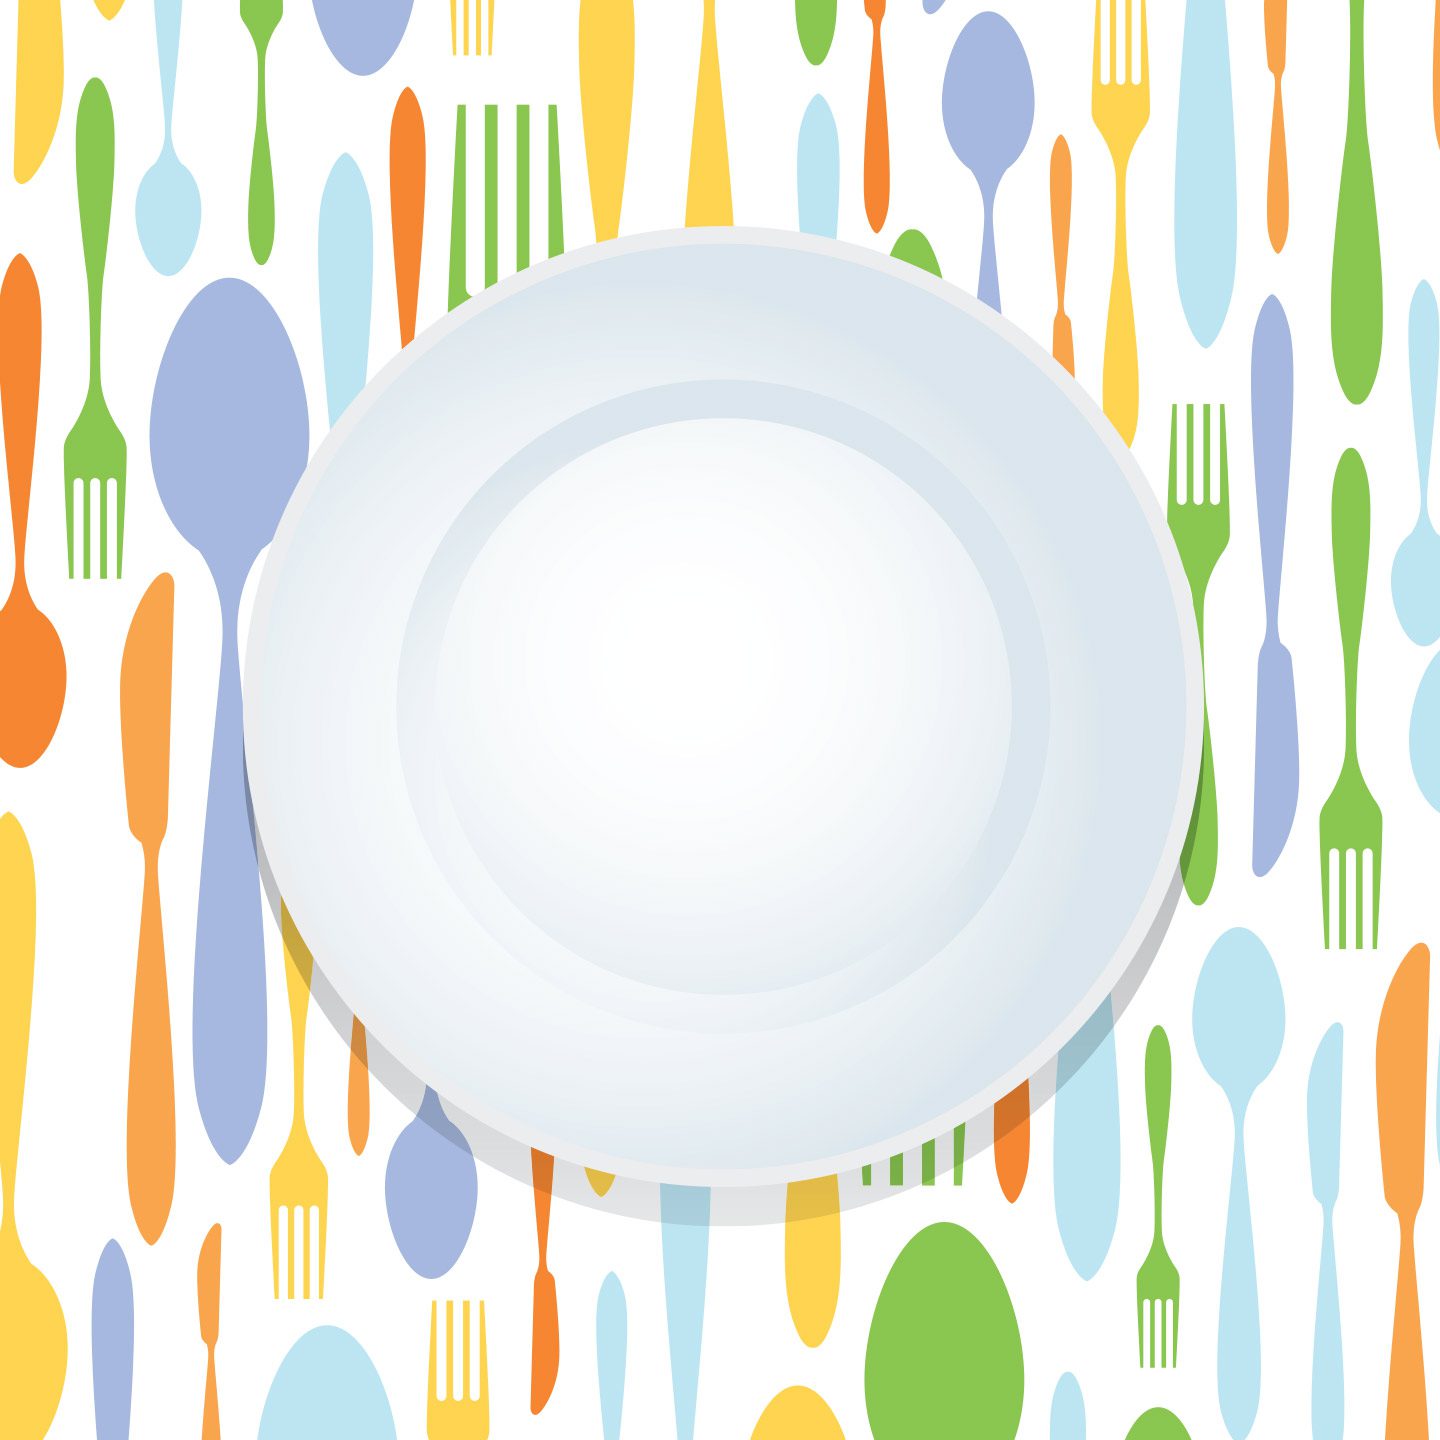 plate on background of colorful utensils